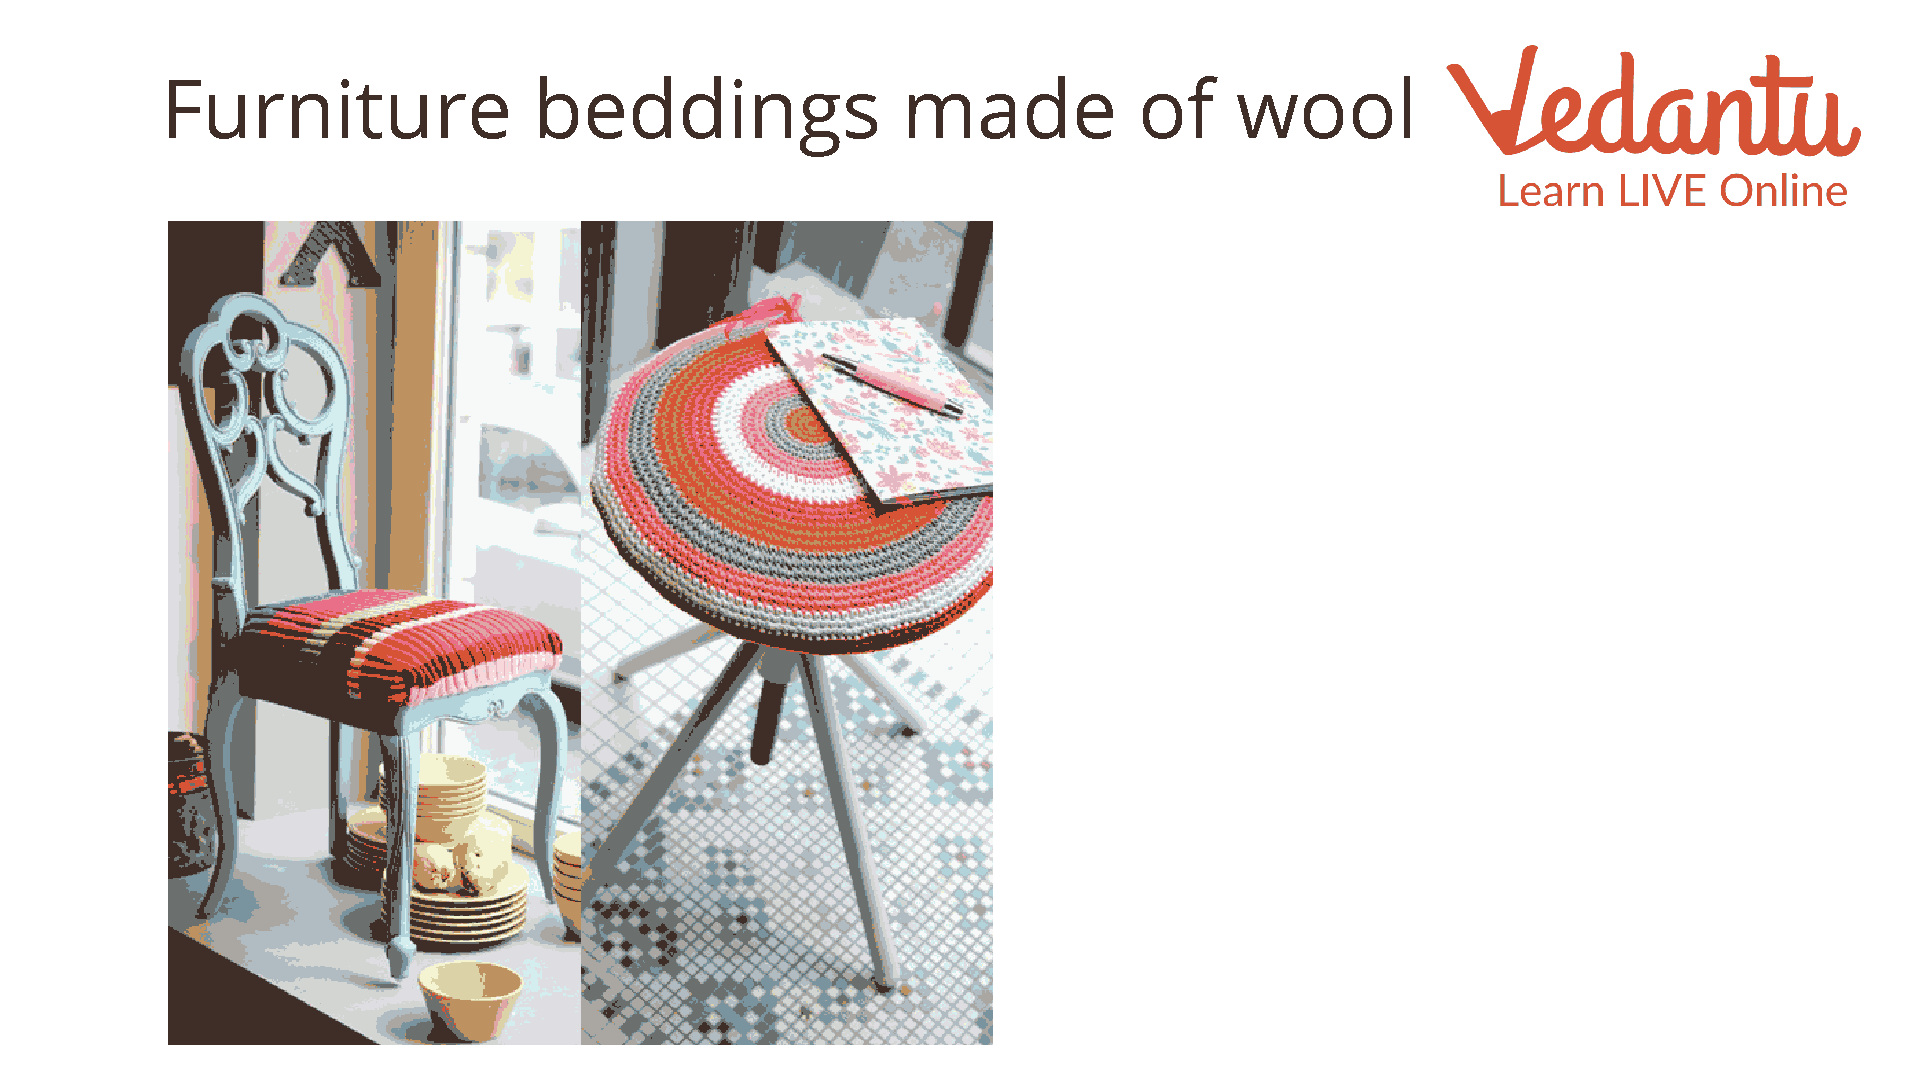 Furniture Beddings are Made of Wool